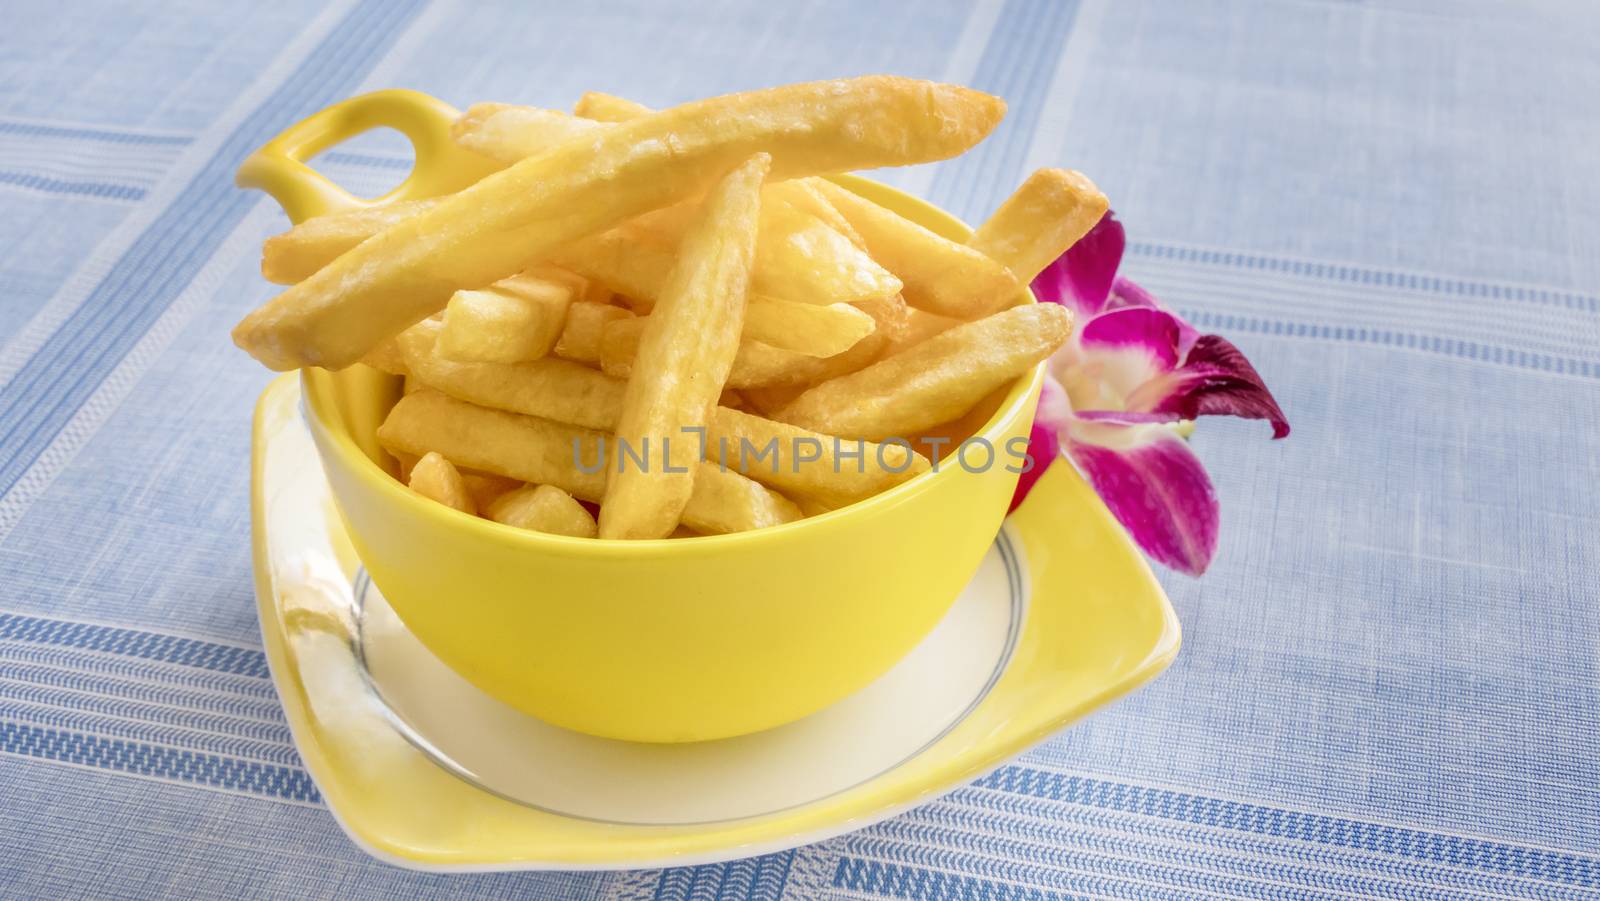 Cups of French fries on table with fresh purple orchid